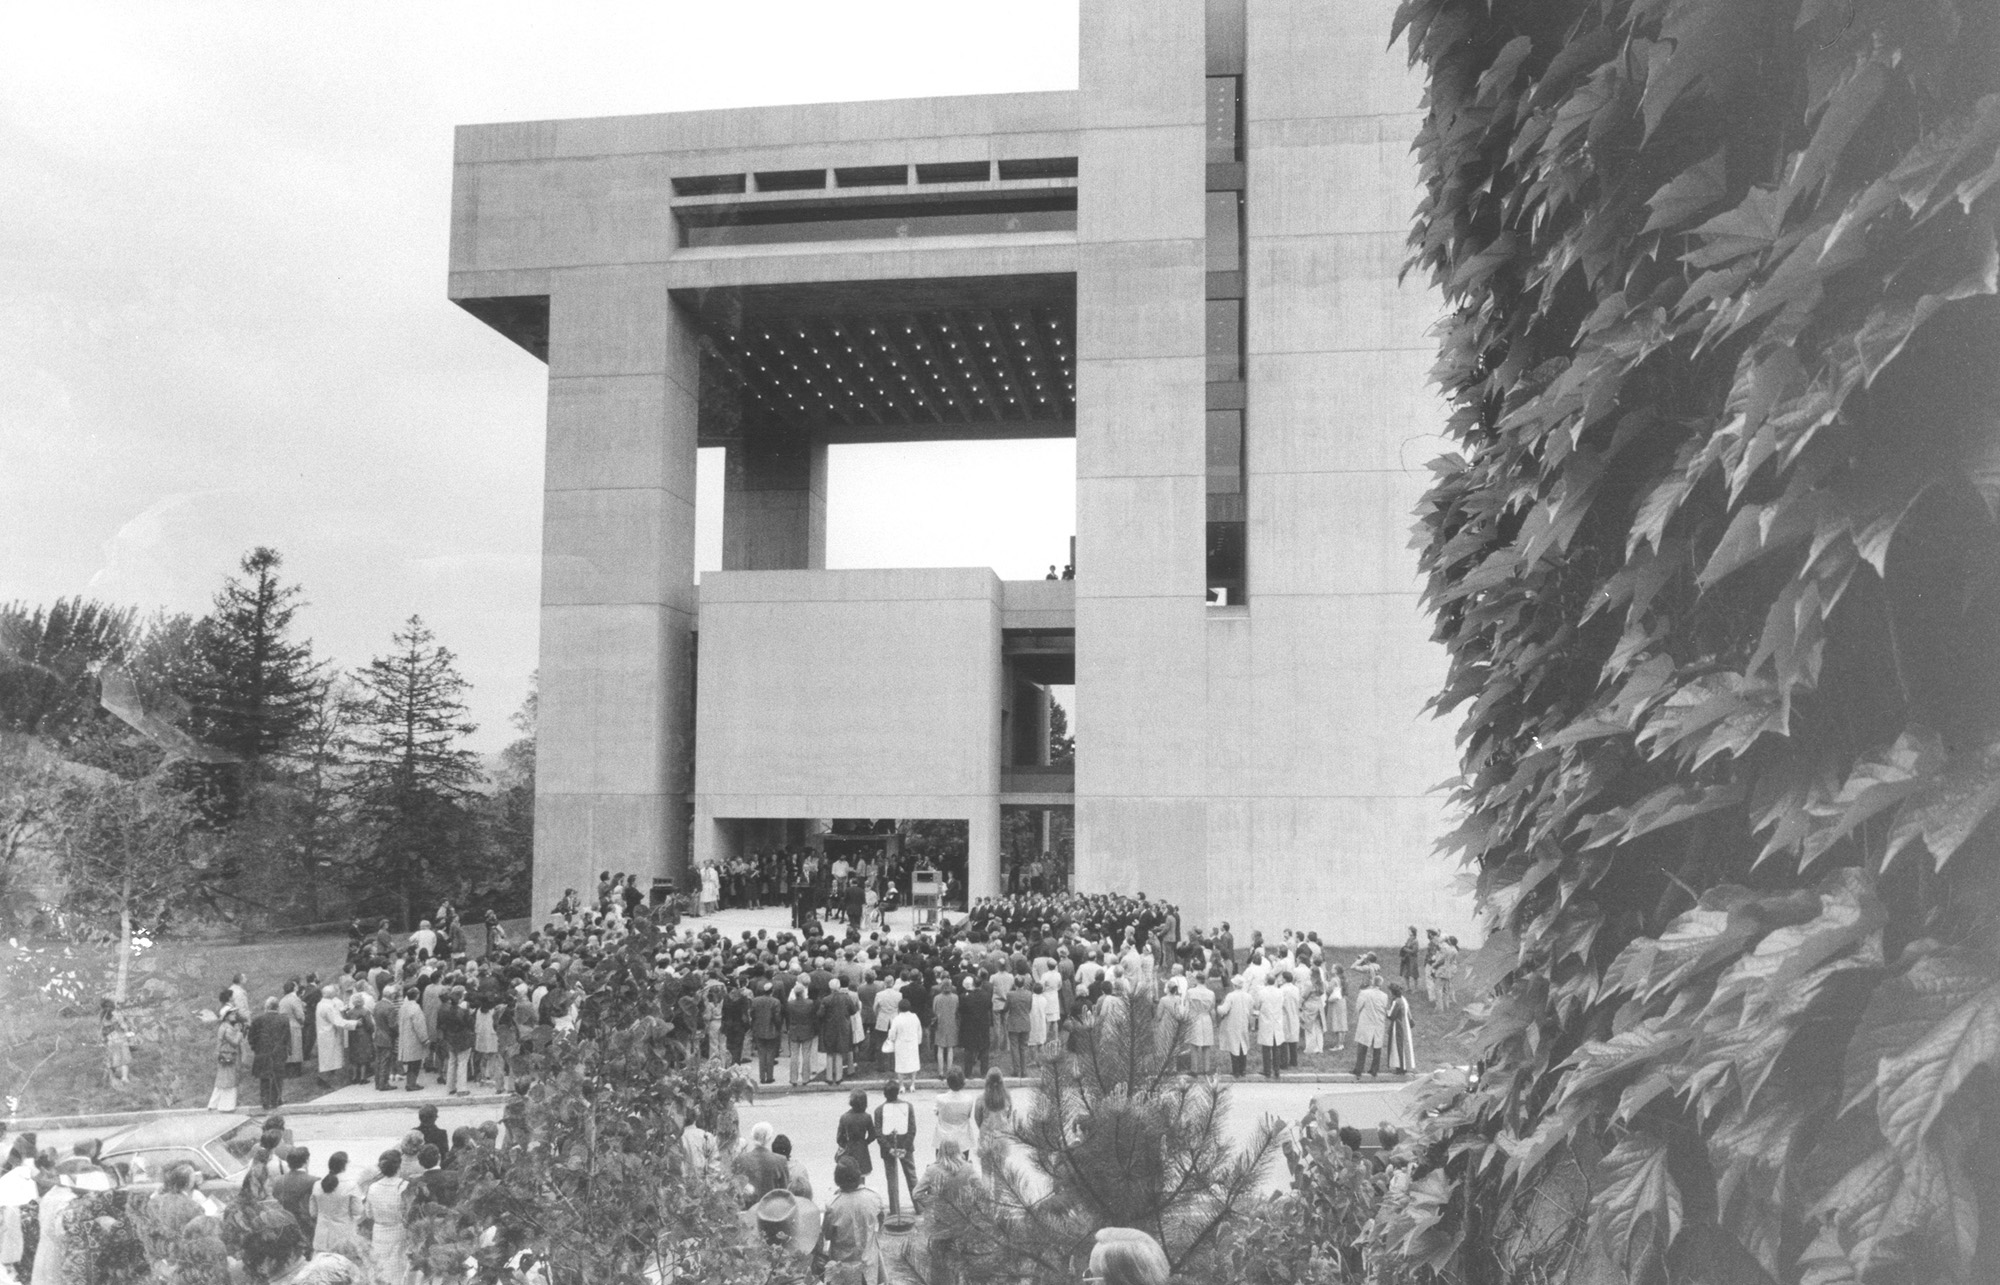 A black and white photo of a large cantilevered building with a crowd gathered in front of the entrance